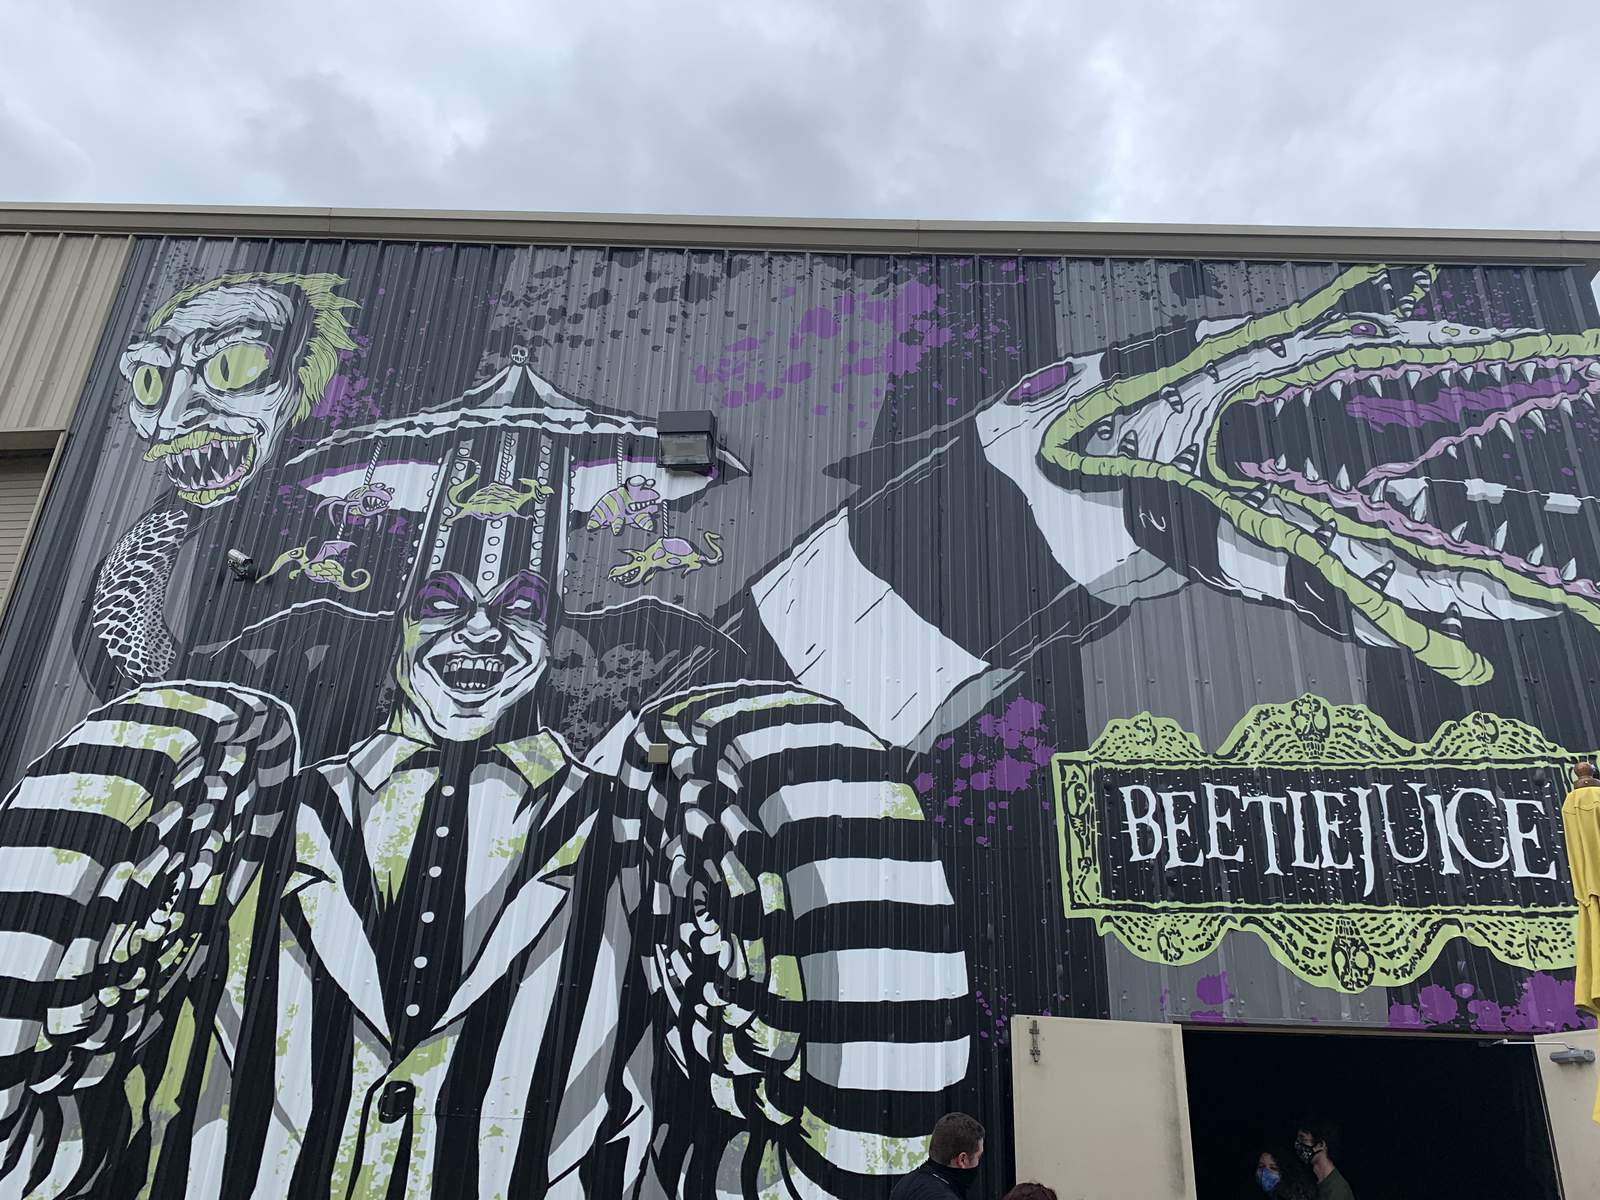 It’s showtime: Universal surprises horror nights fans with ‘Beetlejuice’ house